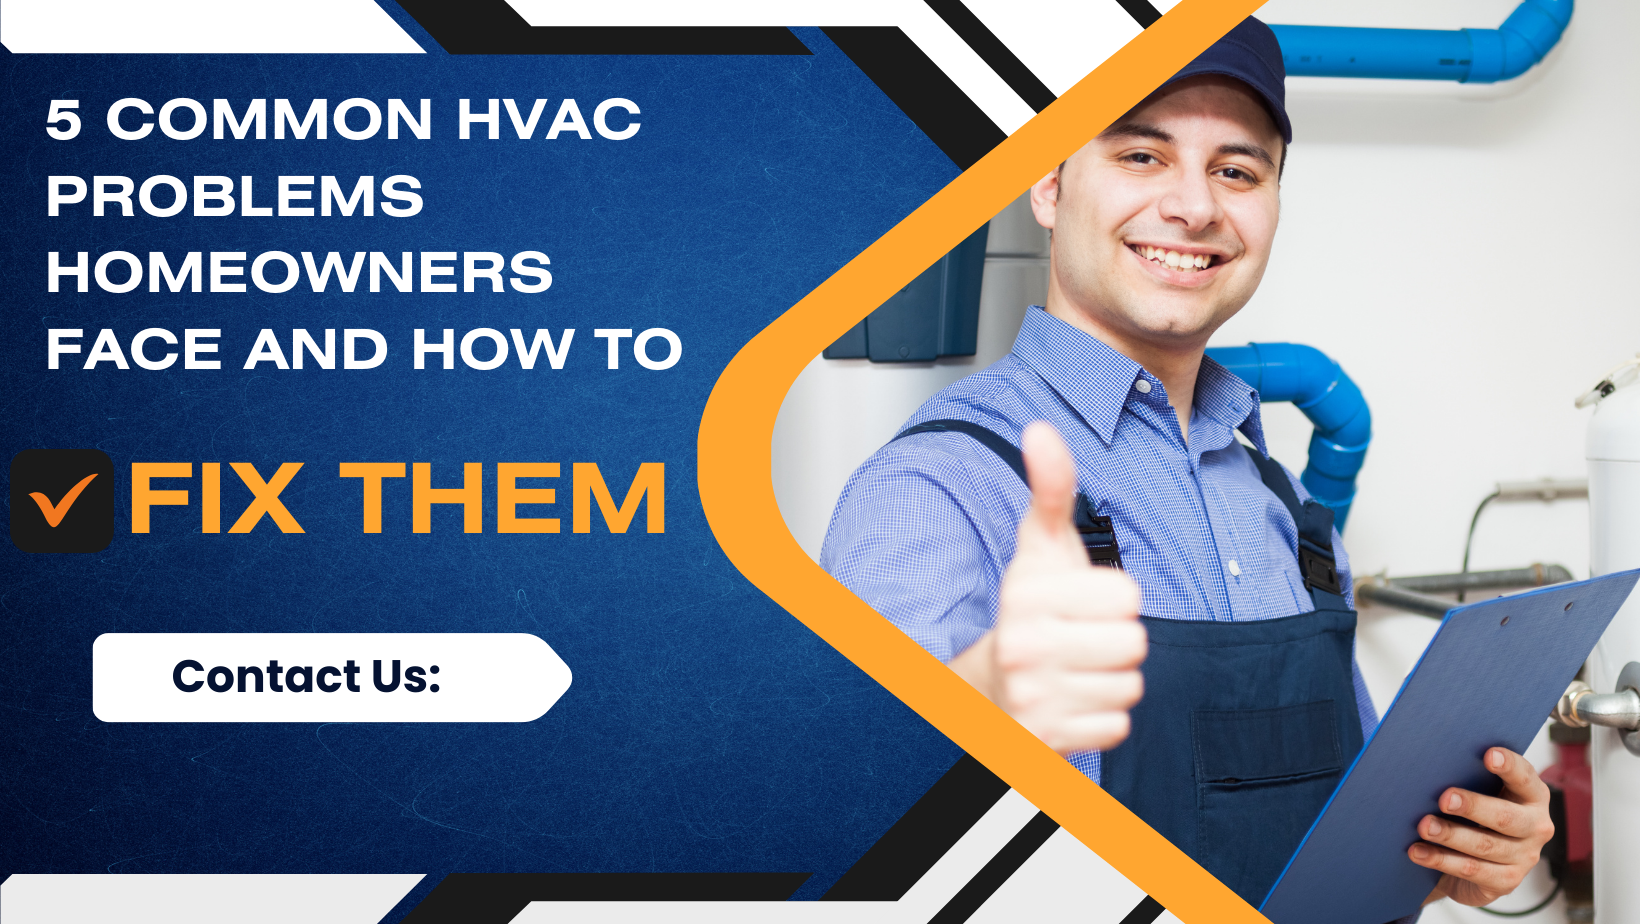 Troubleshooting Guide: Fixing Common HVAC Problems